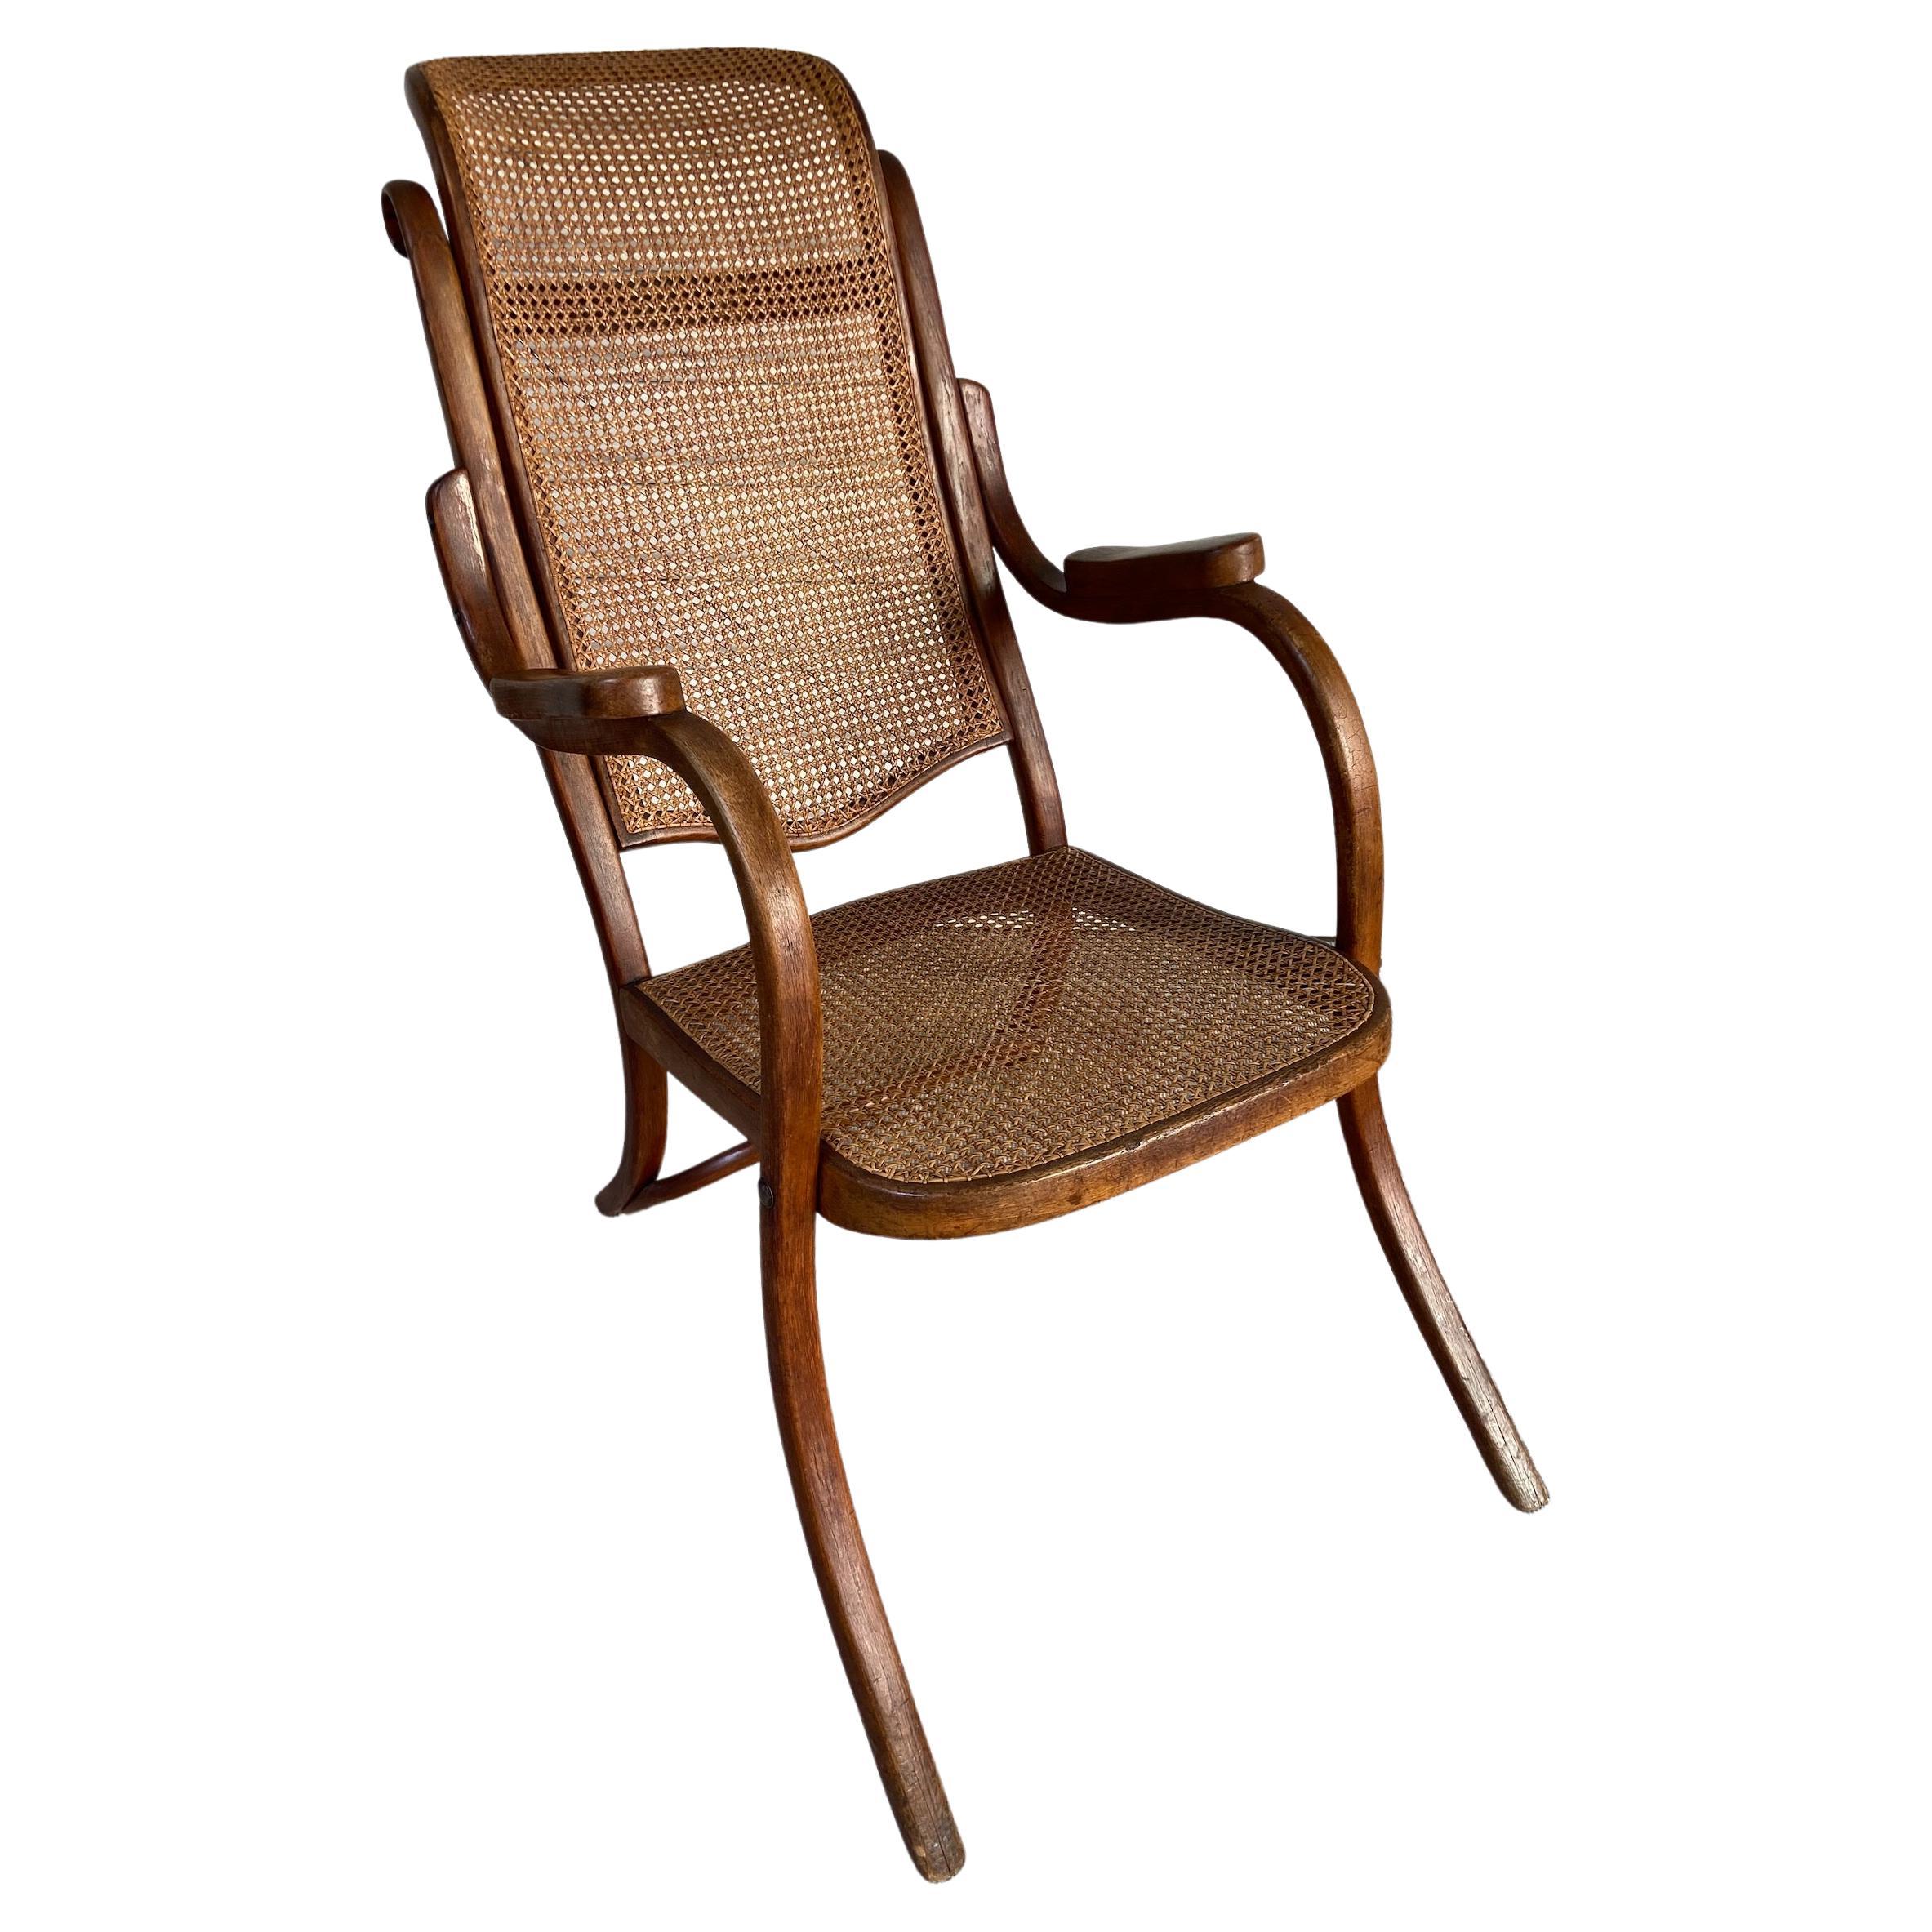 Armchair, Michael Thonet Wood and Rattan, 1865 For Sale